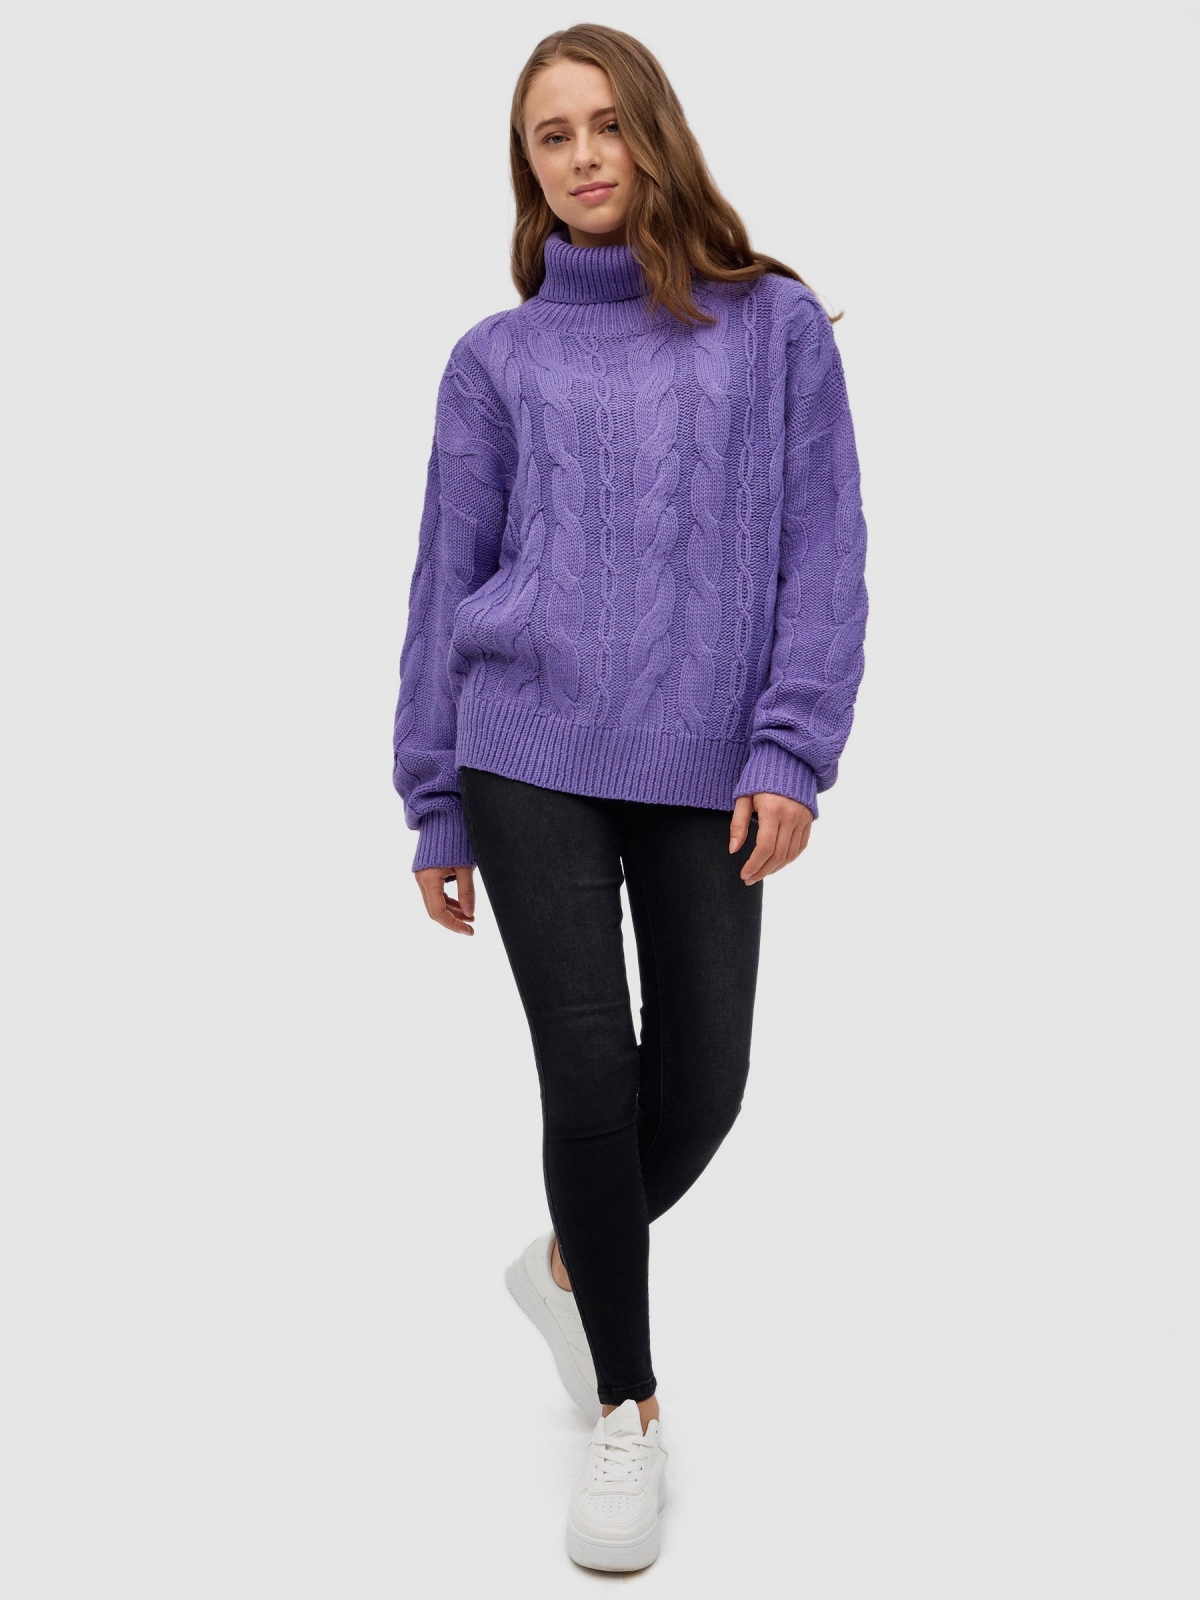 Sweater turn-down collar eights lilac front view